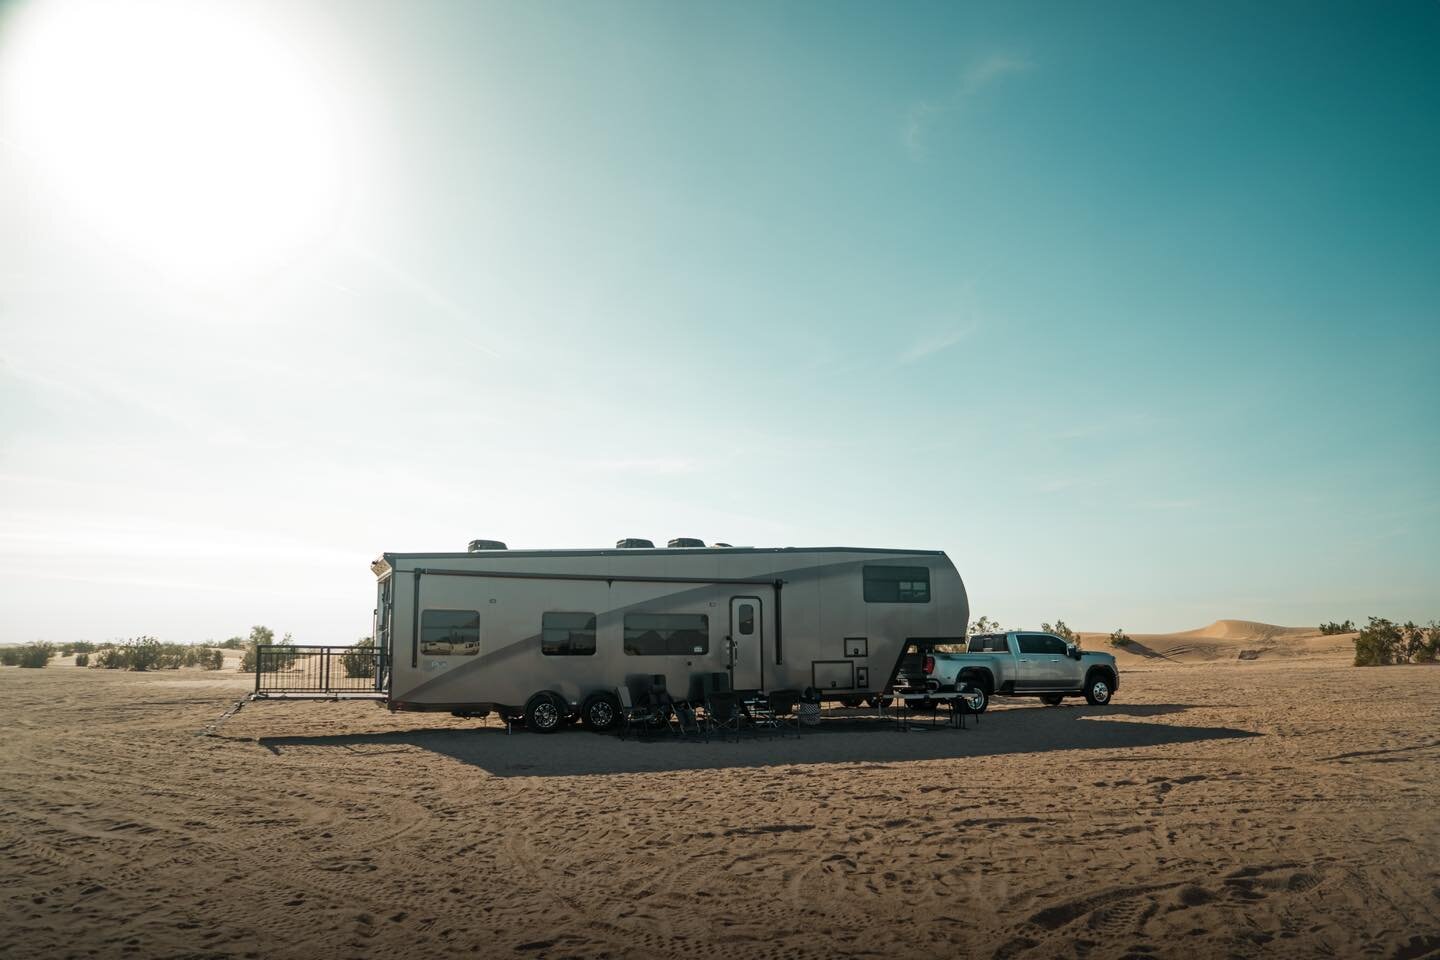 I was recently hired to create some advertising for ATC Trailers, an awesome trailer company based out of Indiana. The creative material I was able to make with this company turned out amazing. Totally missing ripping over the sand dunes!  #SocialMed